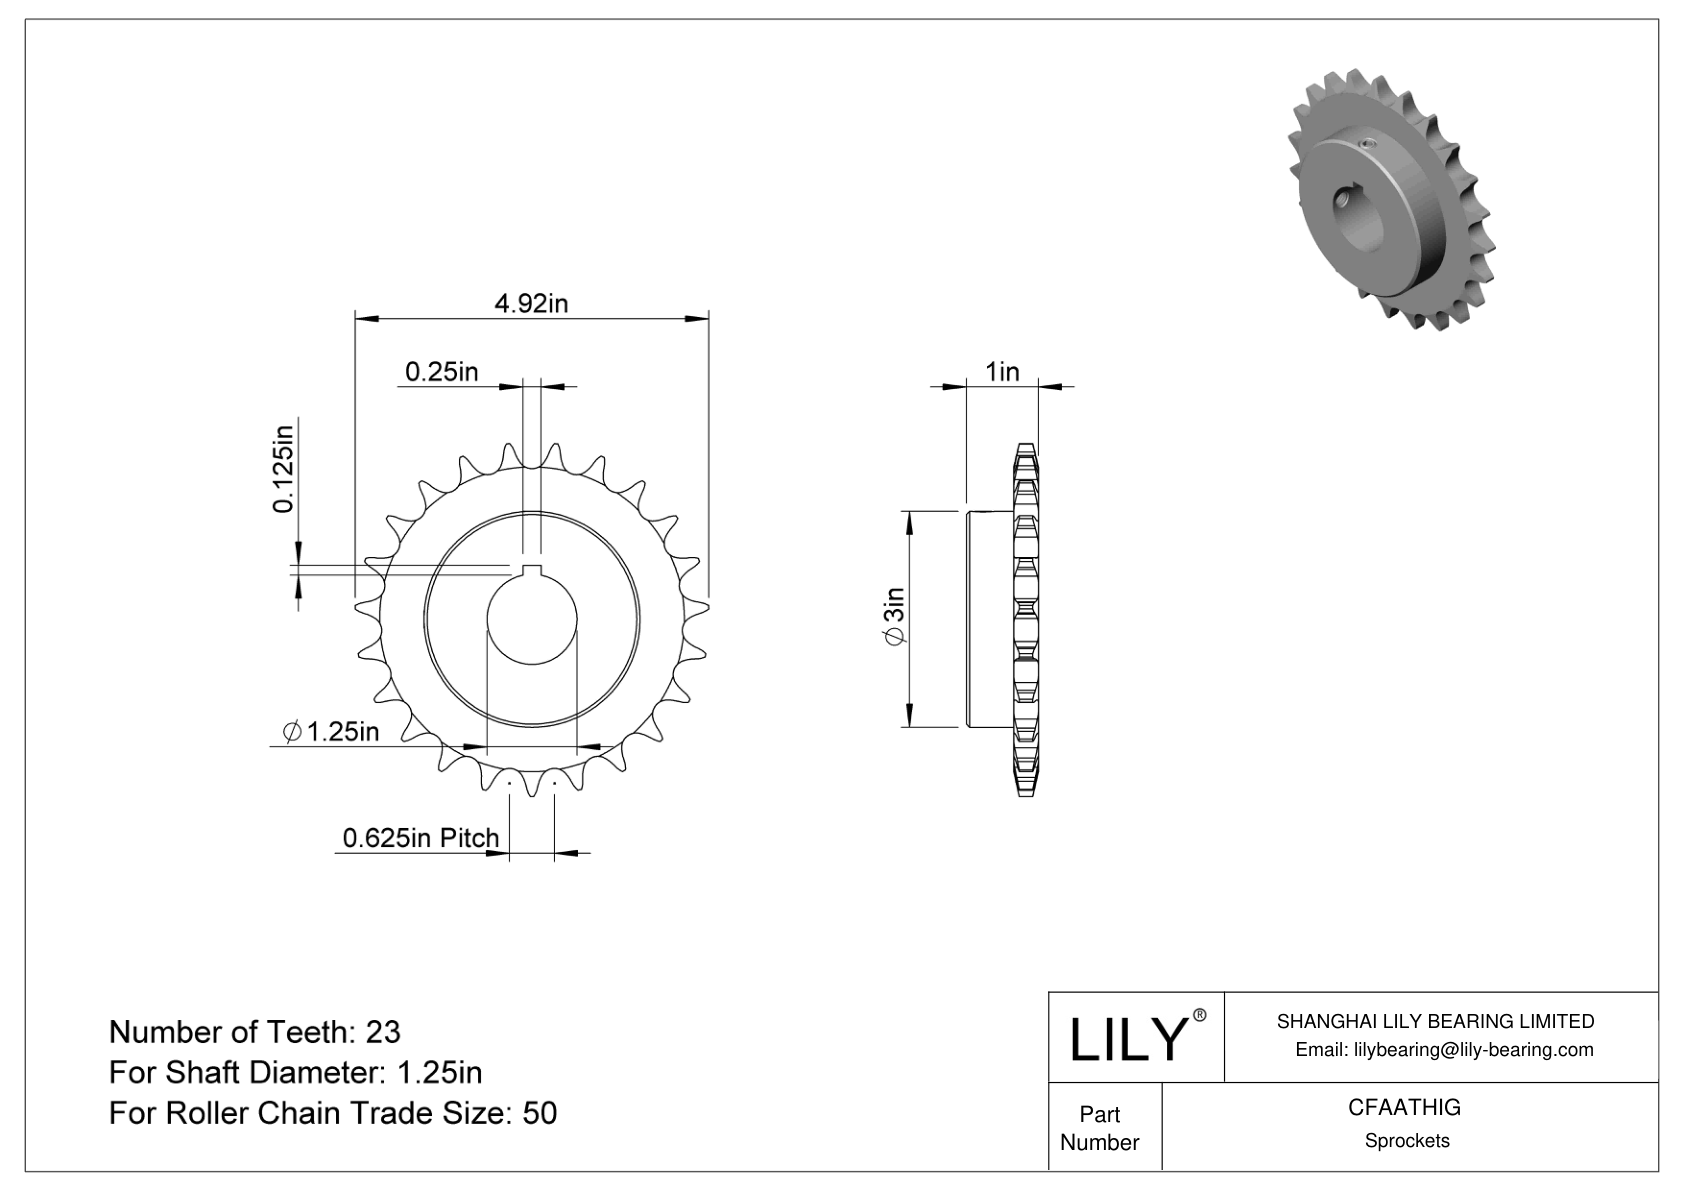 CFAATHIG Wear-Resistant Sprockets for ANSI Roller Chain cad drawing